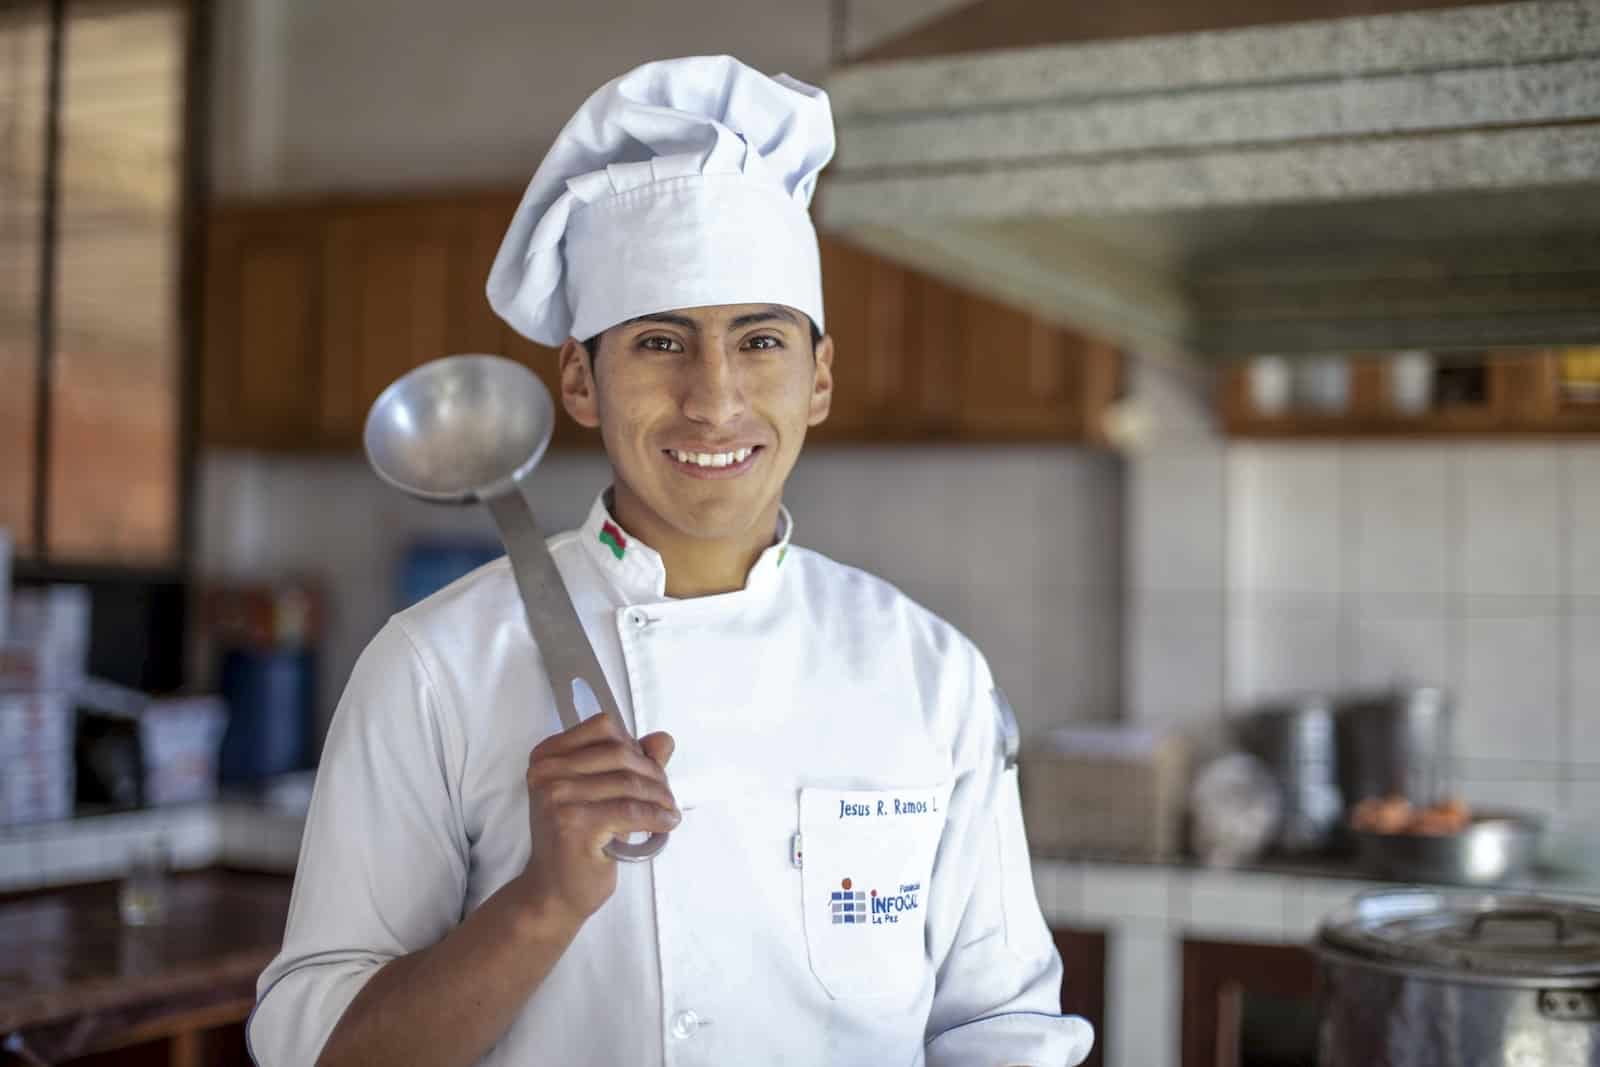 A man wearing a chef's hat and white chef's coat stands in a kitchen, holding a large ladle over his shoulder, smiling at the camera. 